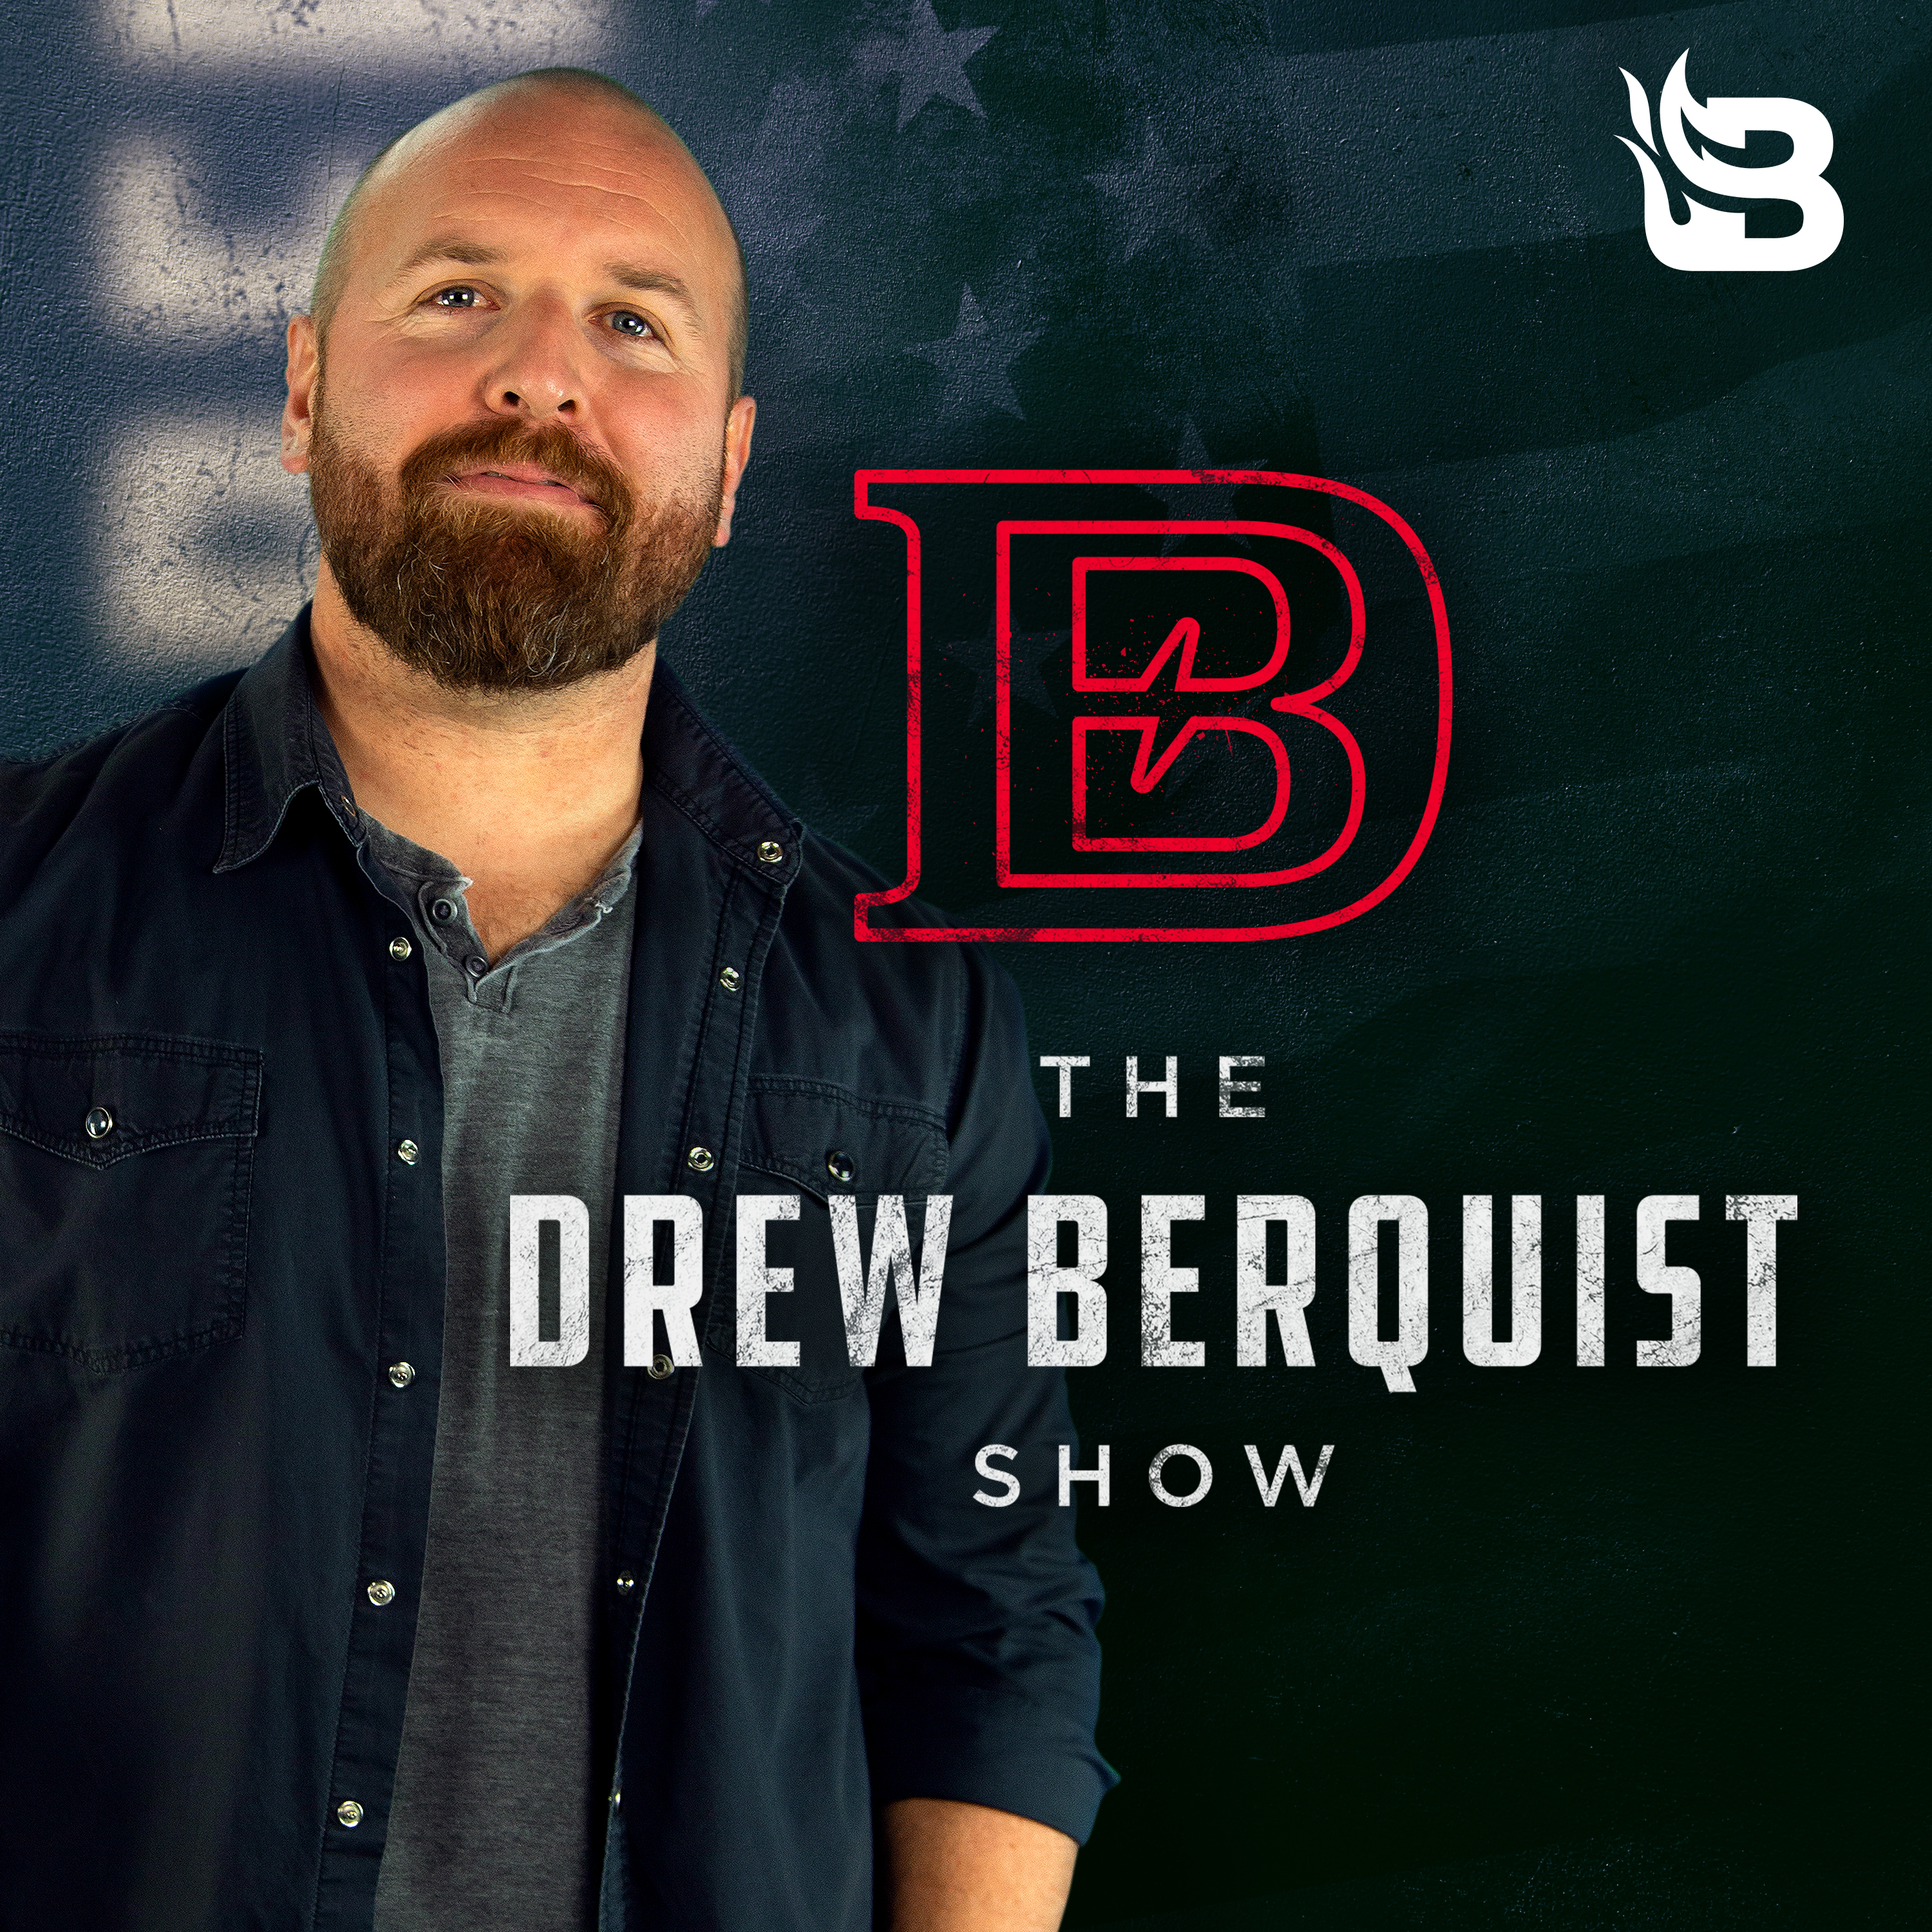 Ep 147 | All Charges Dropped for Jussie Smollett | Adam Schiff Wants New Investigation | The Drew Berquist Show